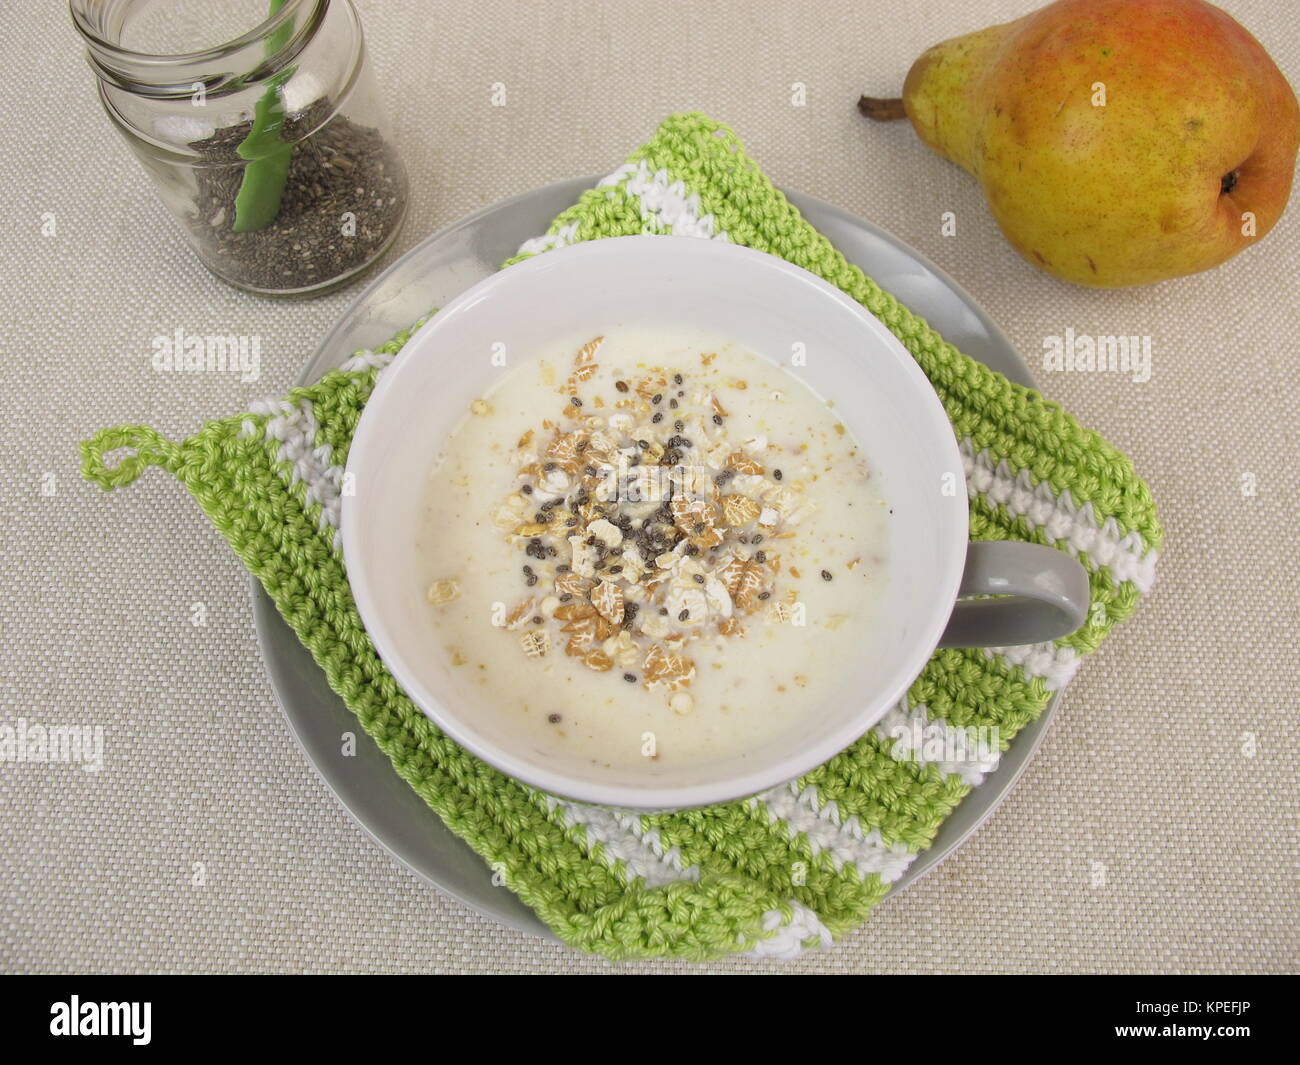 a cup of cereal drink with chia seeds Stock Photo